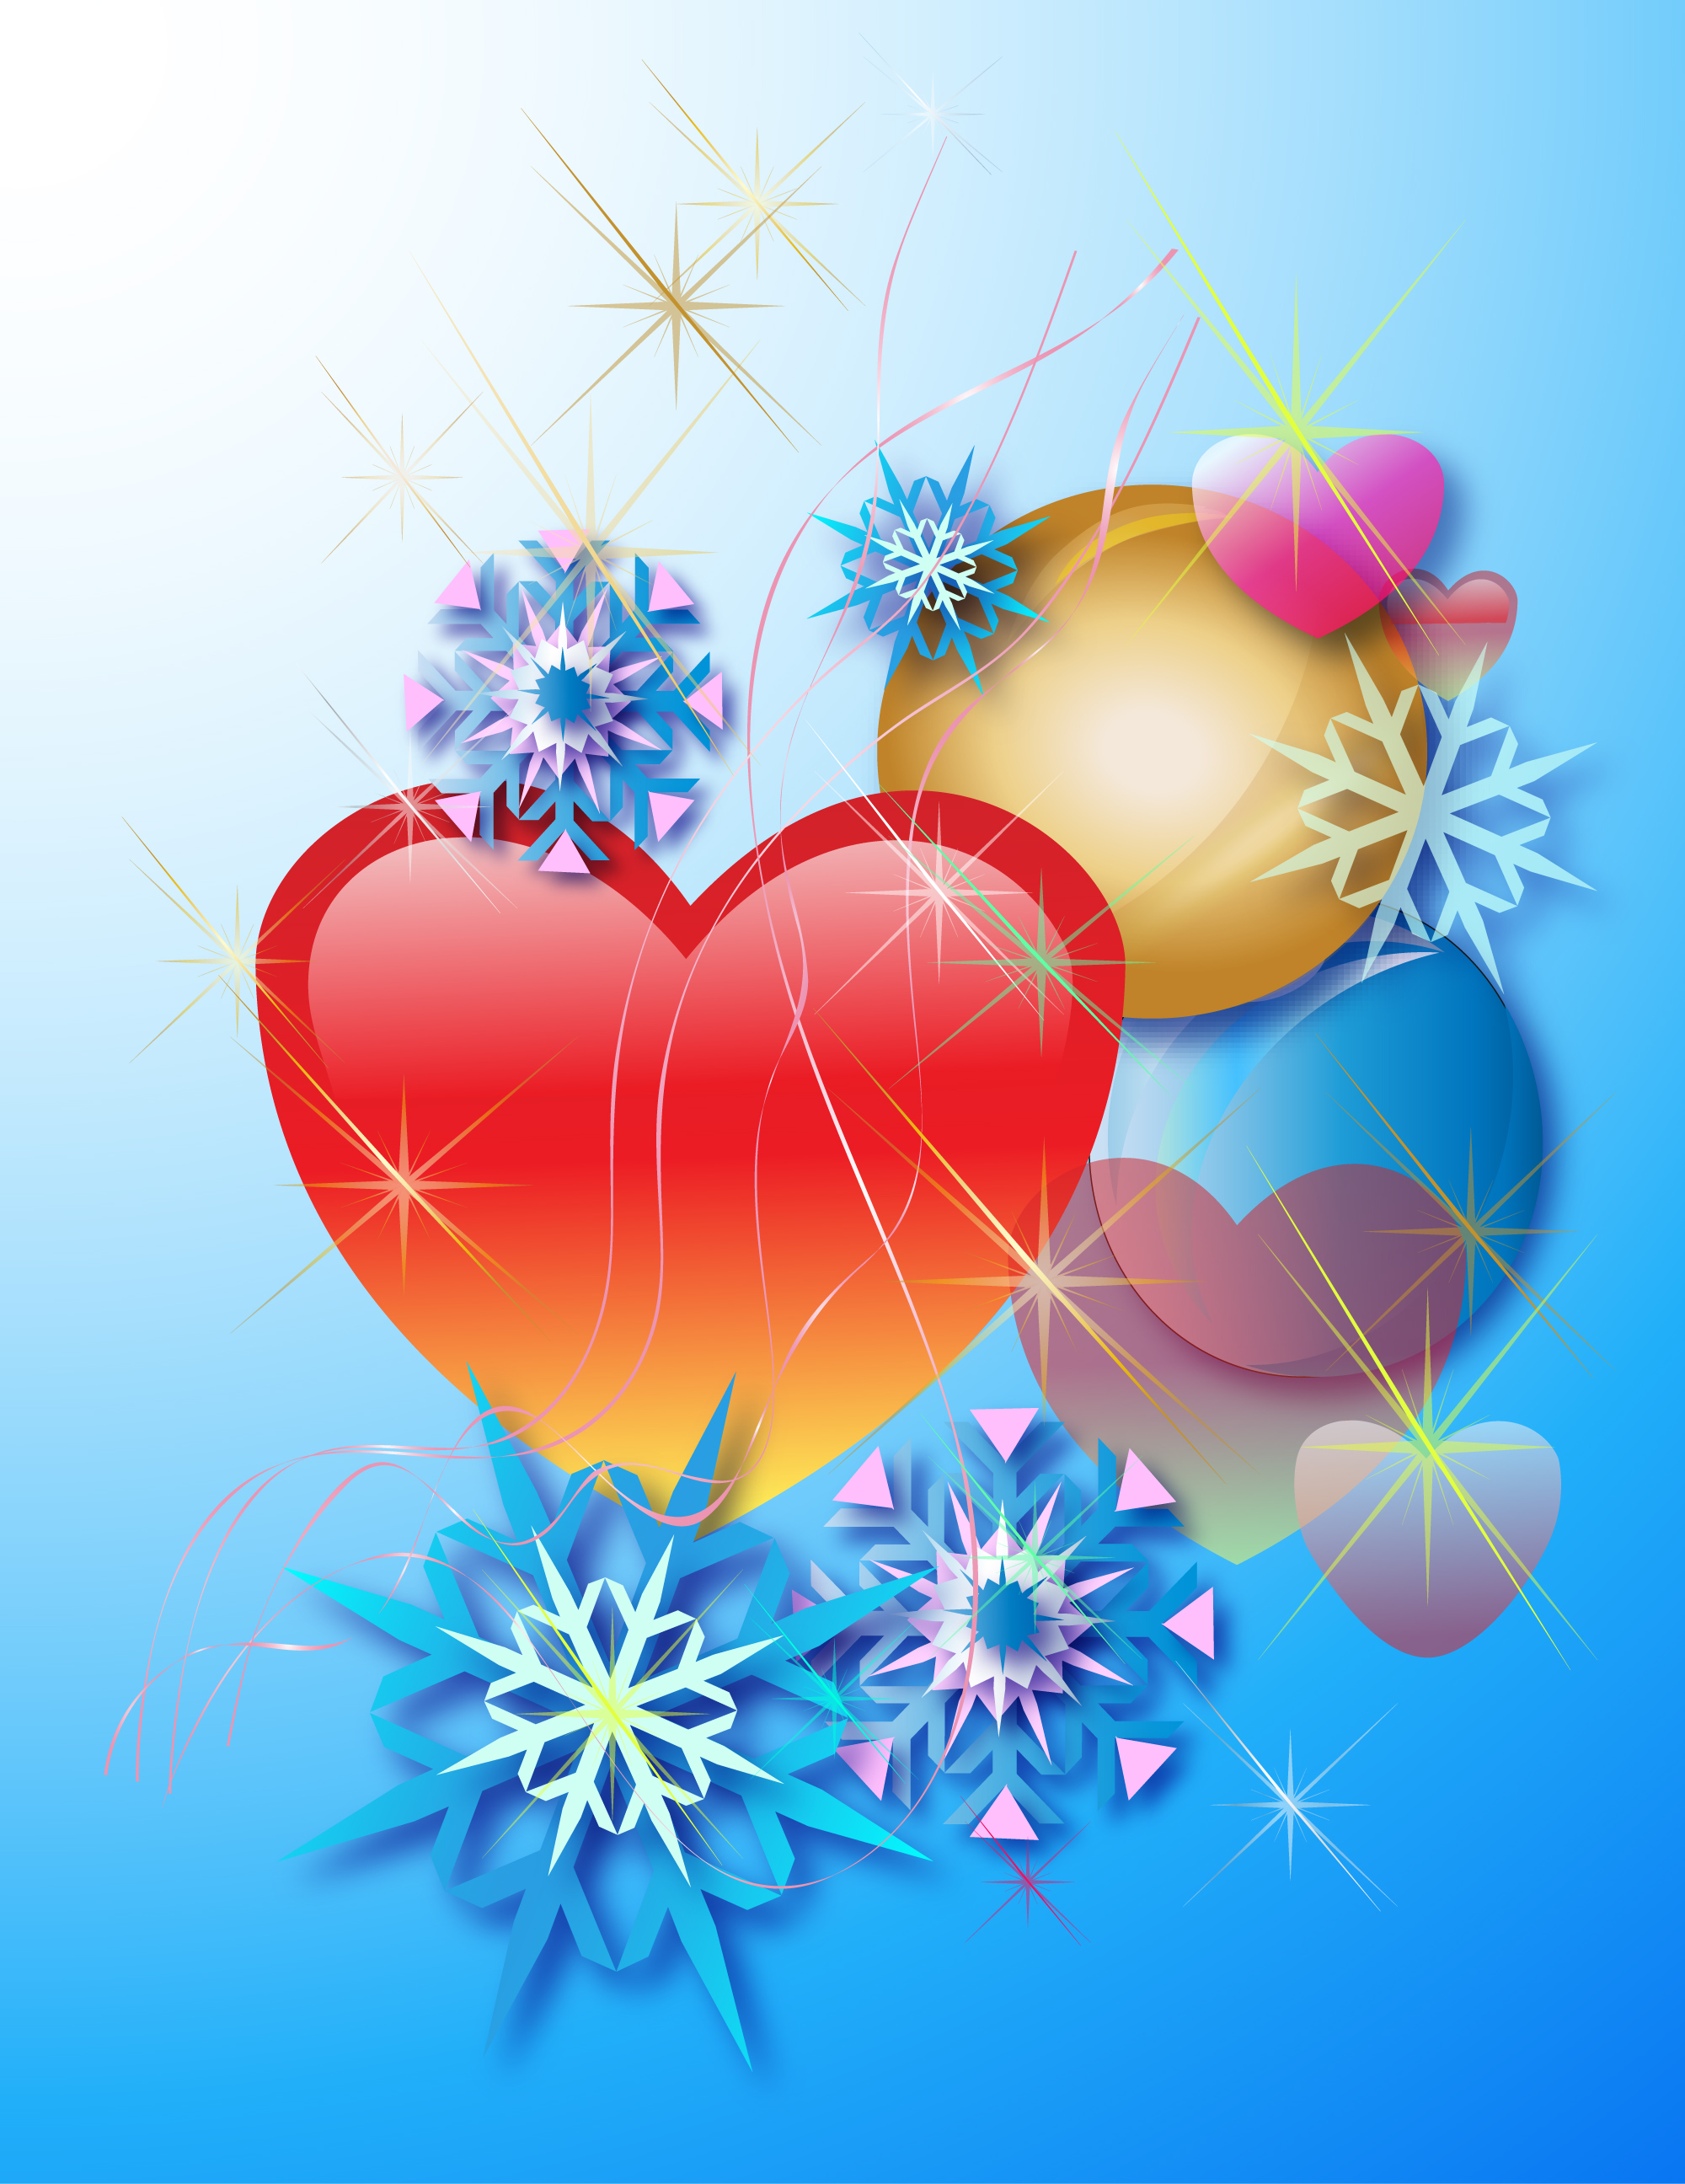 Hearts and snowflakes